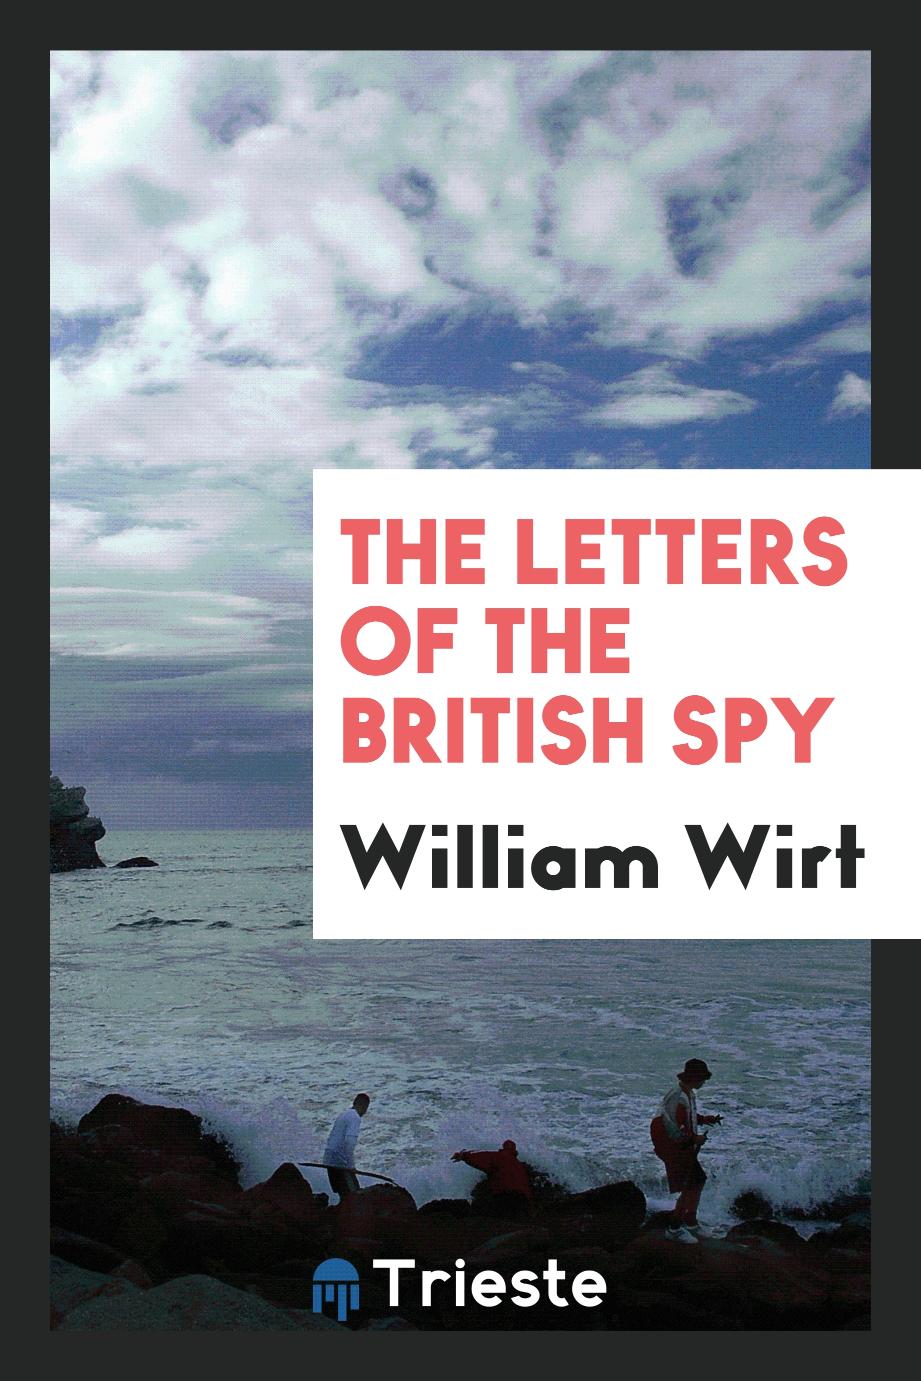 The letters of the British spy